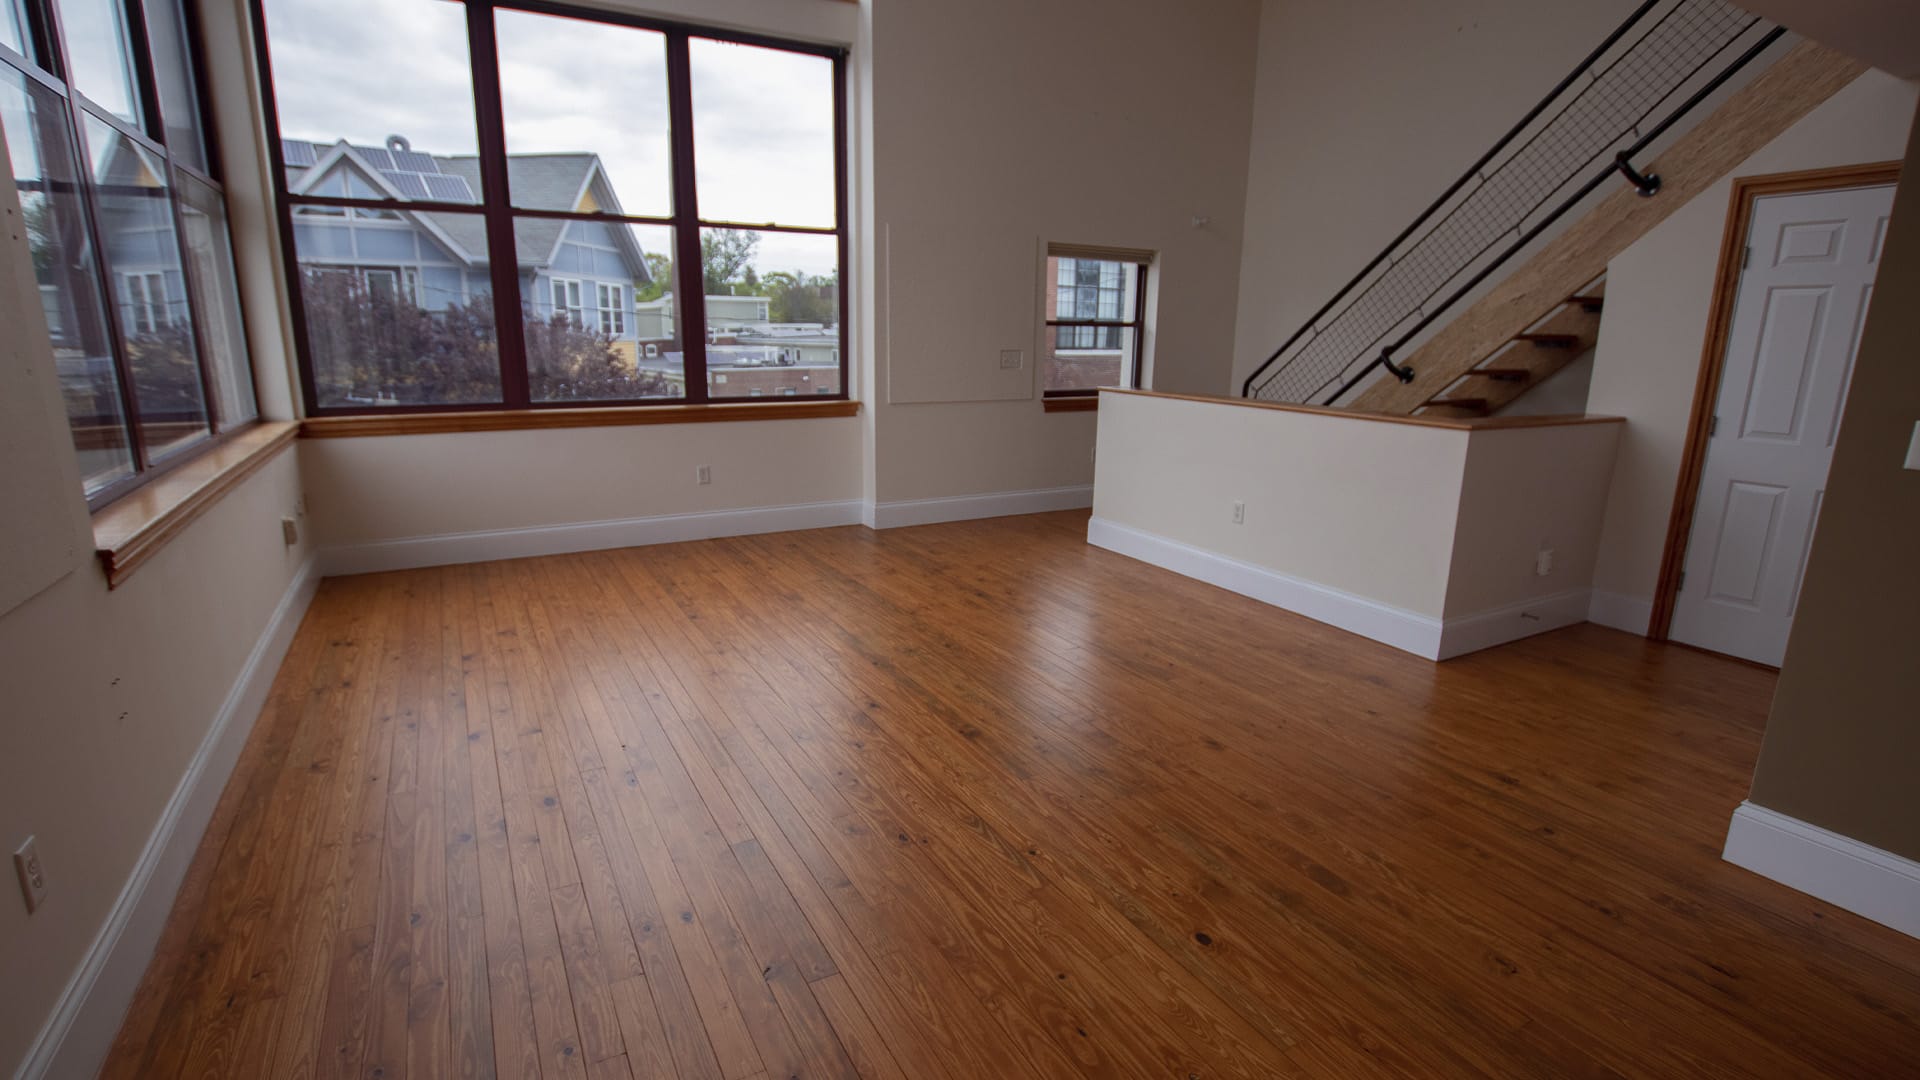 Weles Wood Floor Services in JamaicaPlain after